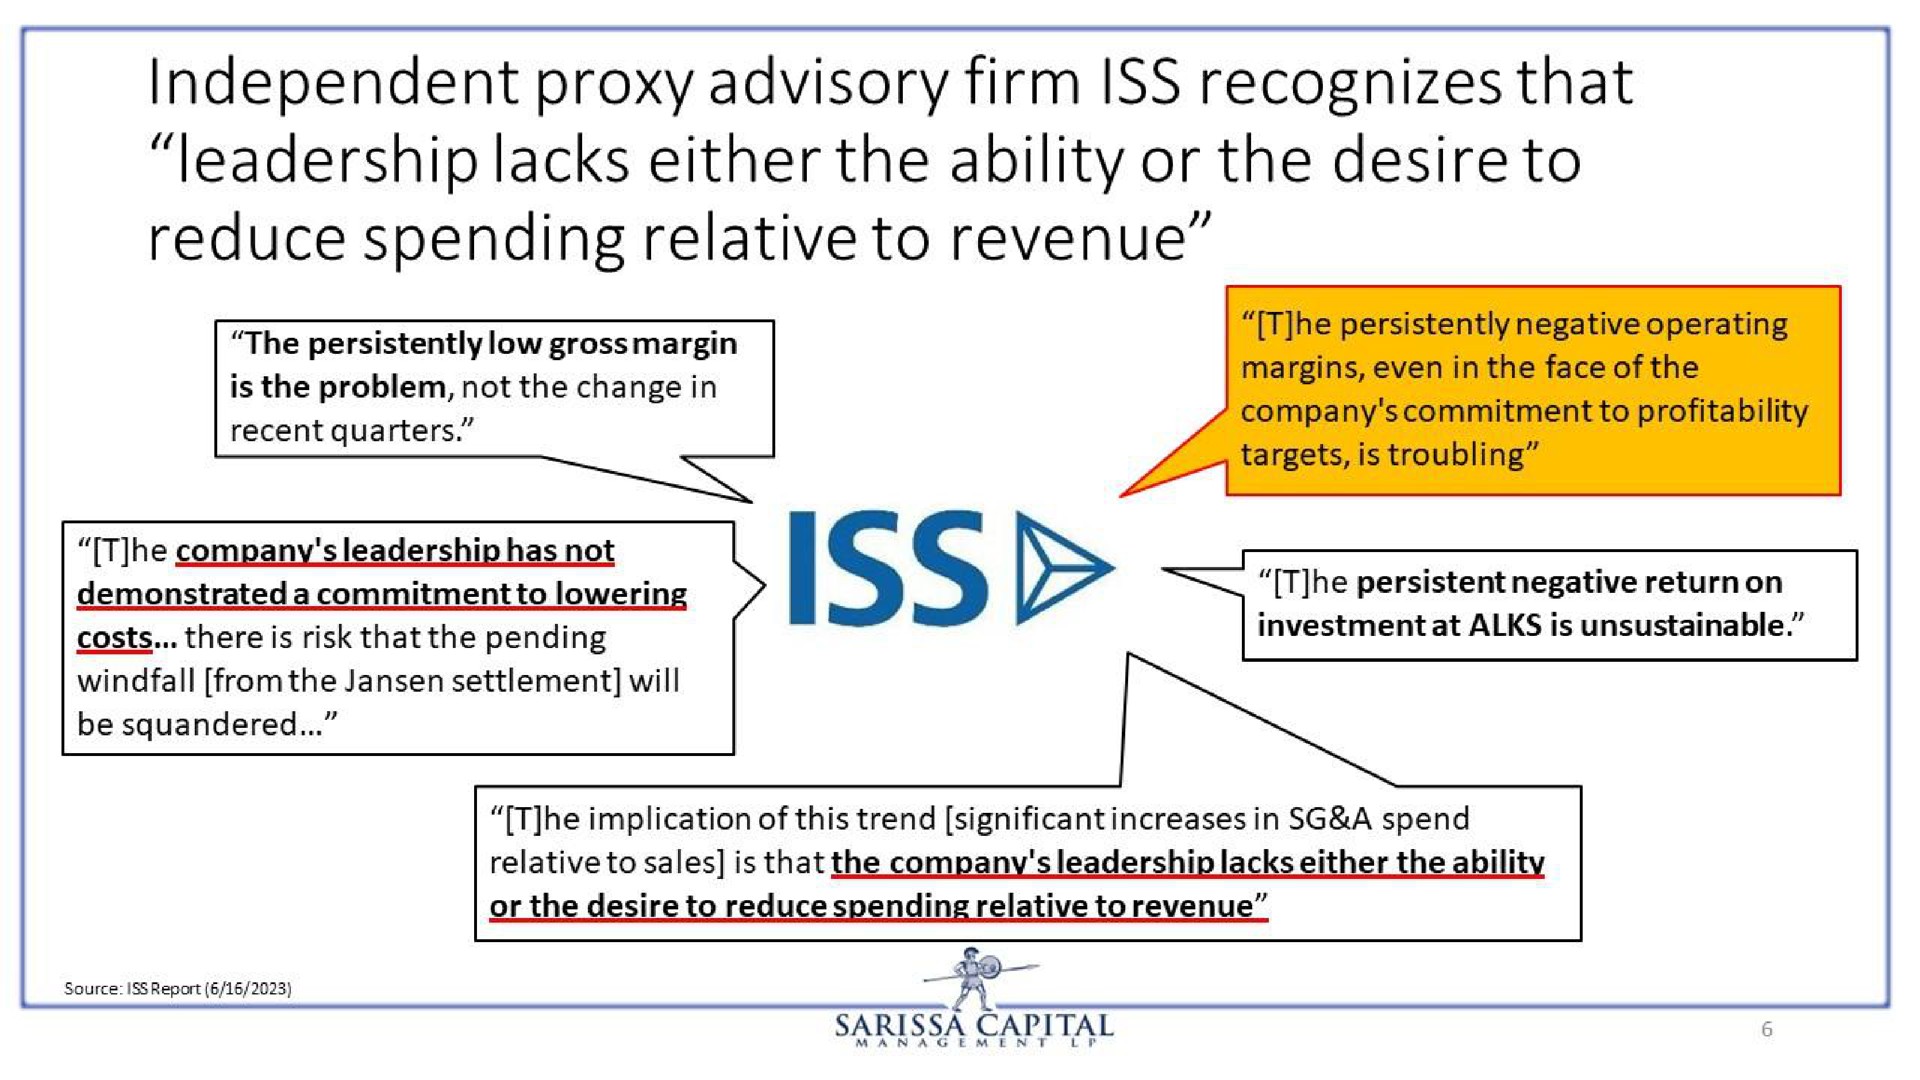 independent proxy advisory firm iss recognizes that leadership lacks either the ability or the desire to reduce spending relative to revenue | Sarissa Capital